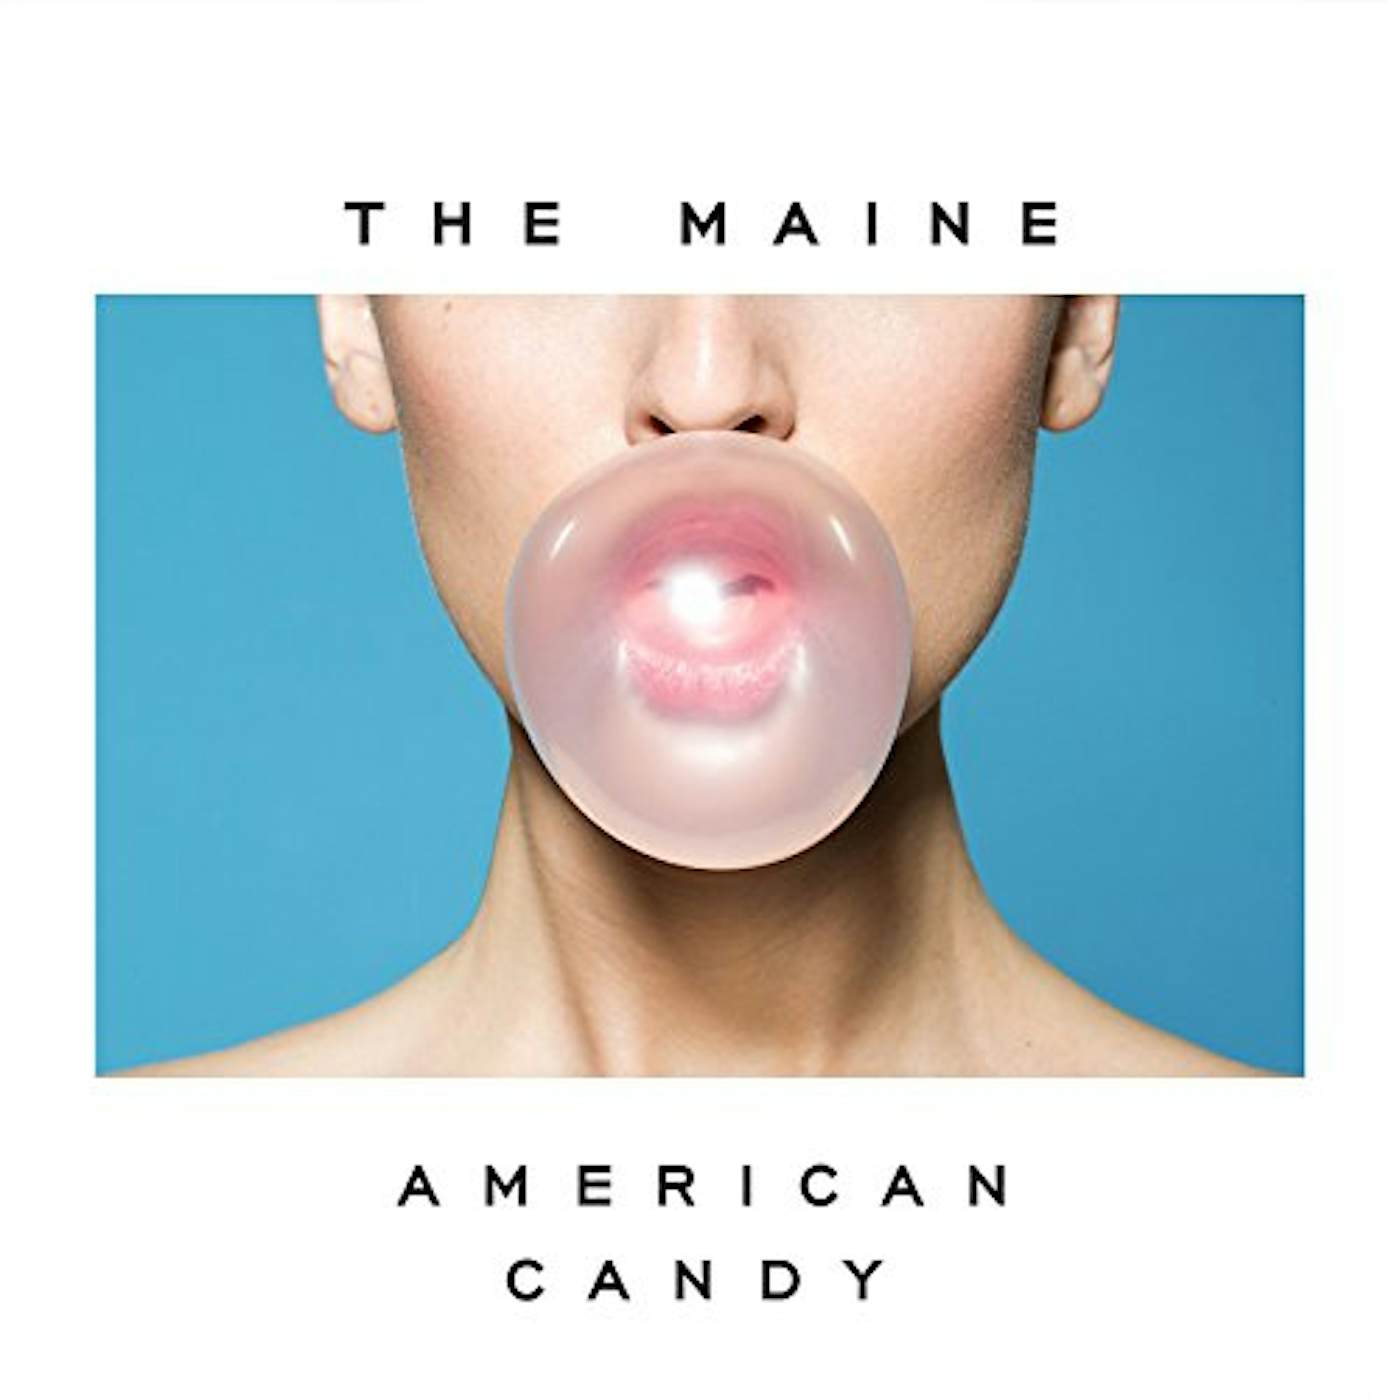 The Maine AMERICAN CANDY CD